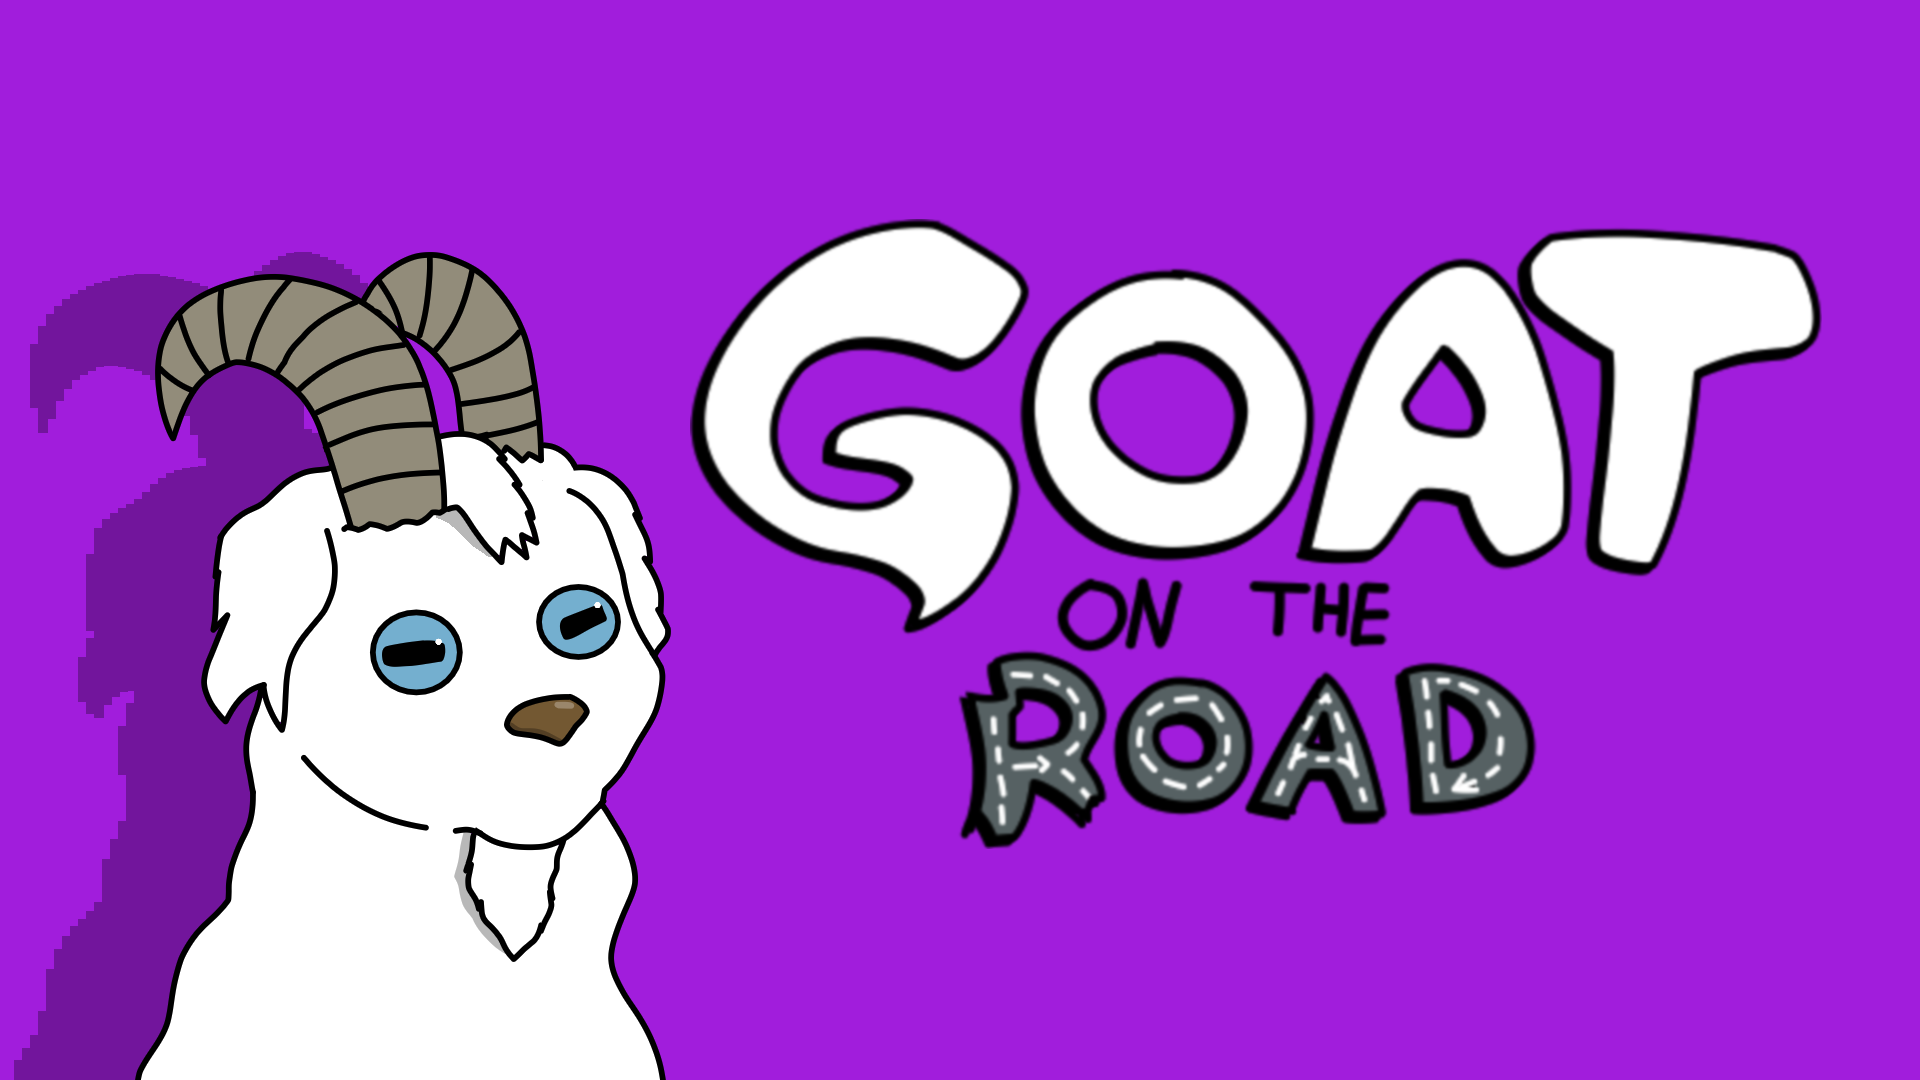 Goat on the Road